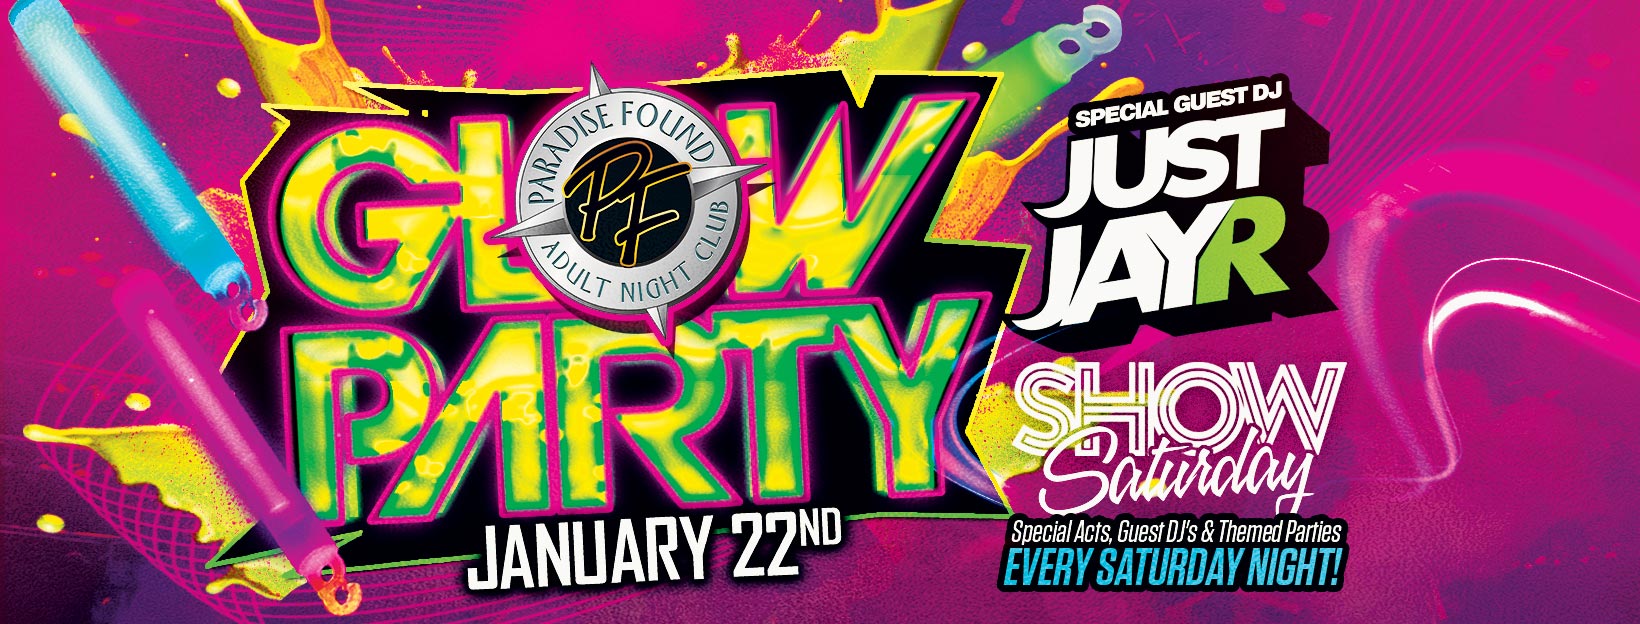 Glow Party in Paradise Jan 22nd